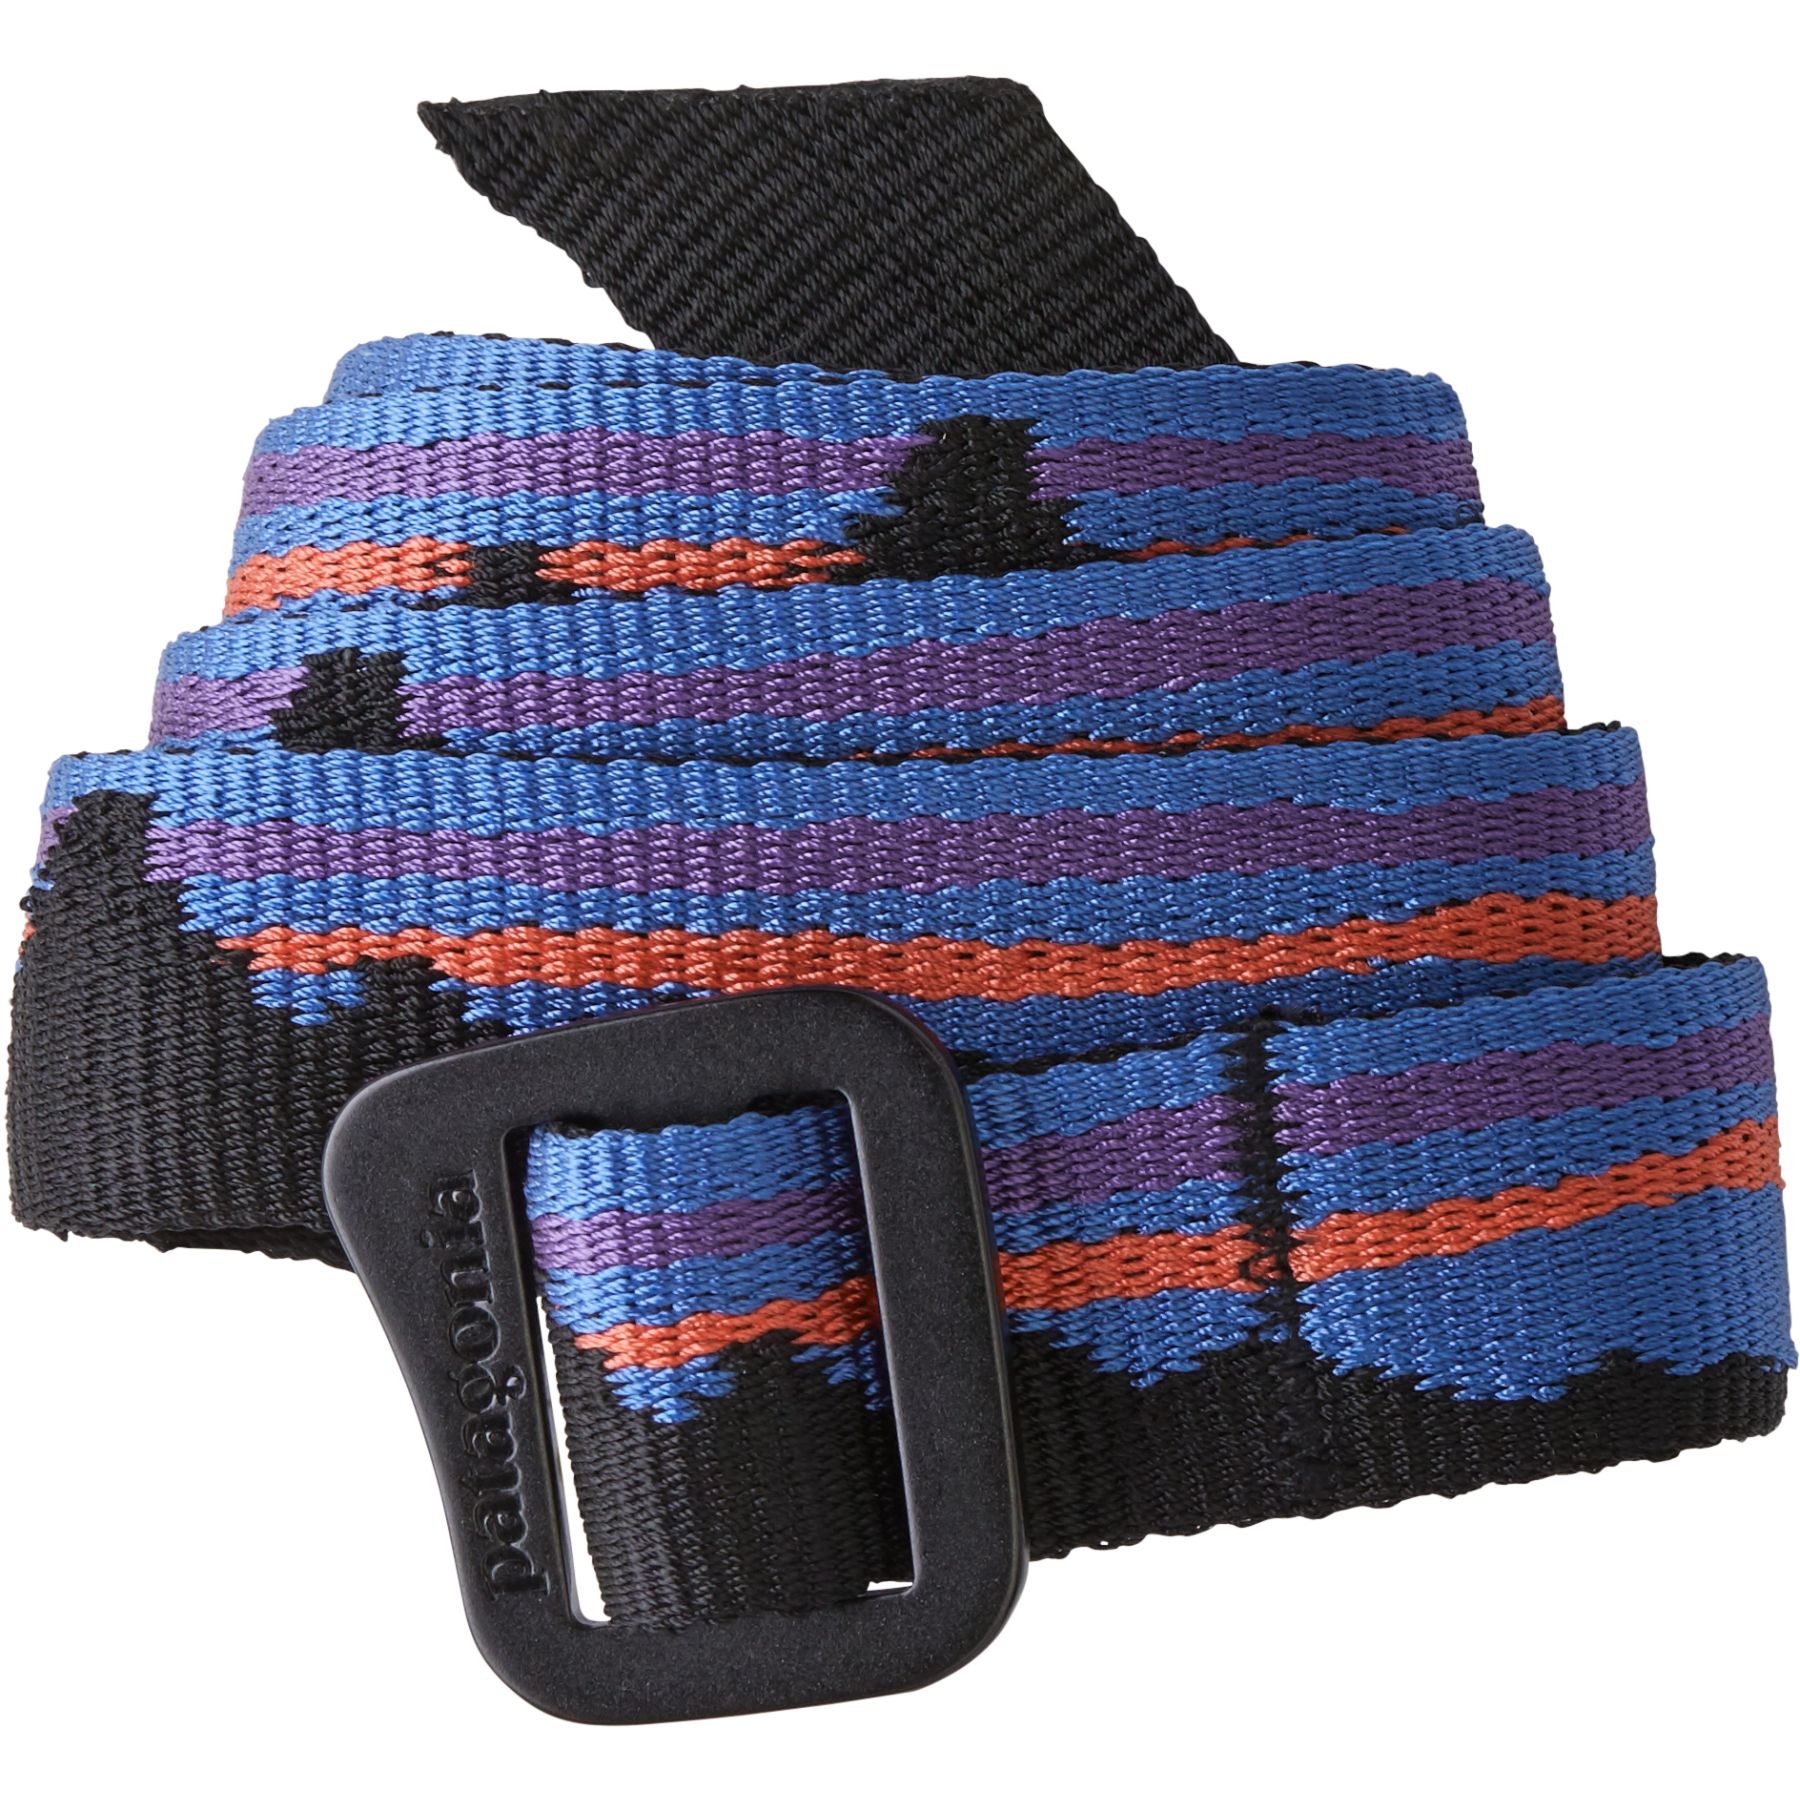 Picture of Patagonia Friction Belt - Fitz Roy Belt: Black